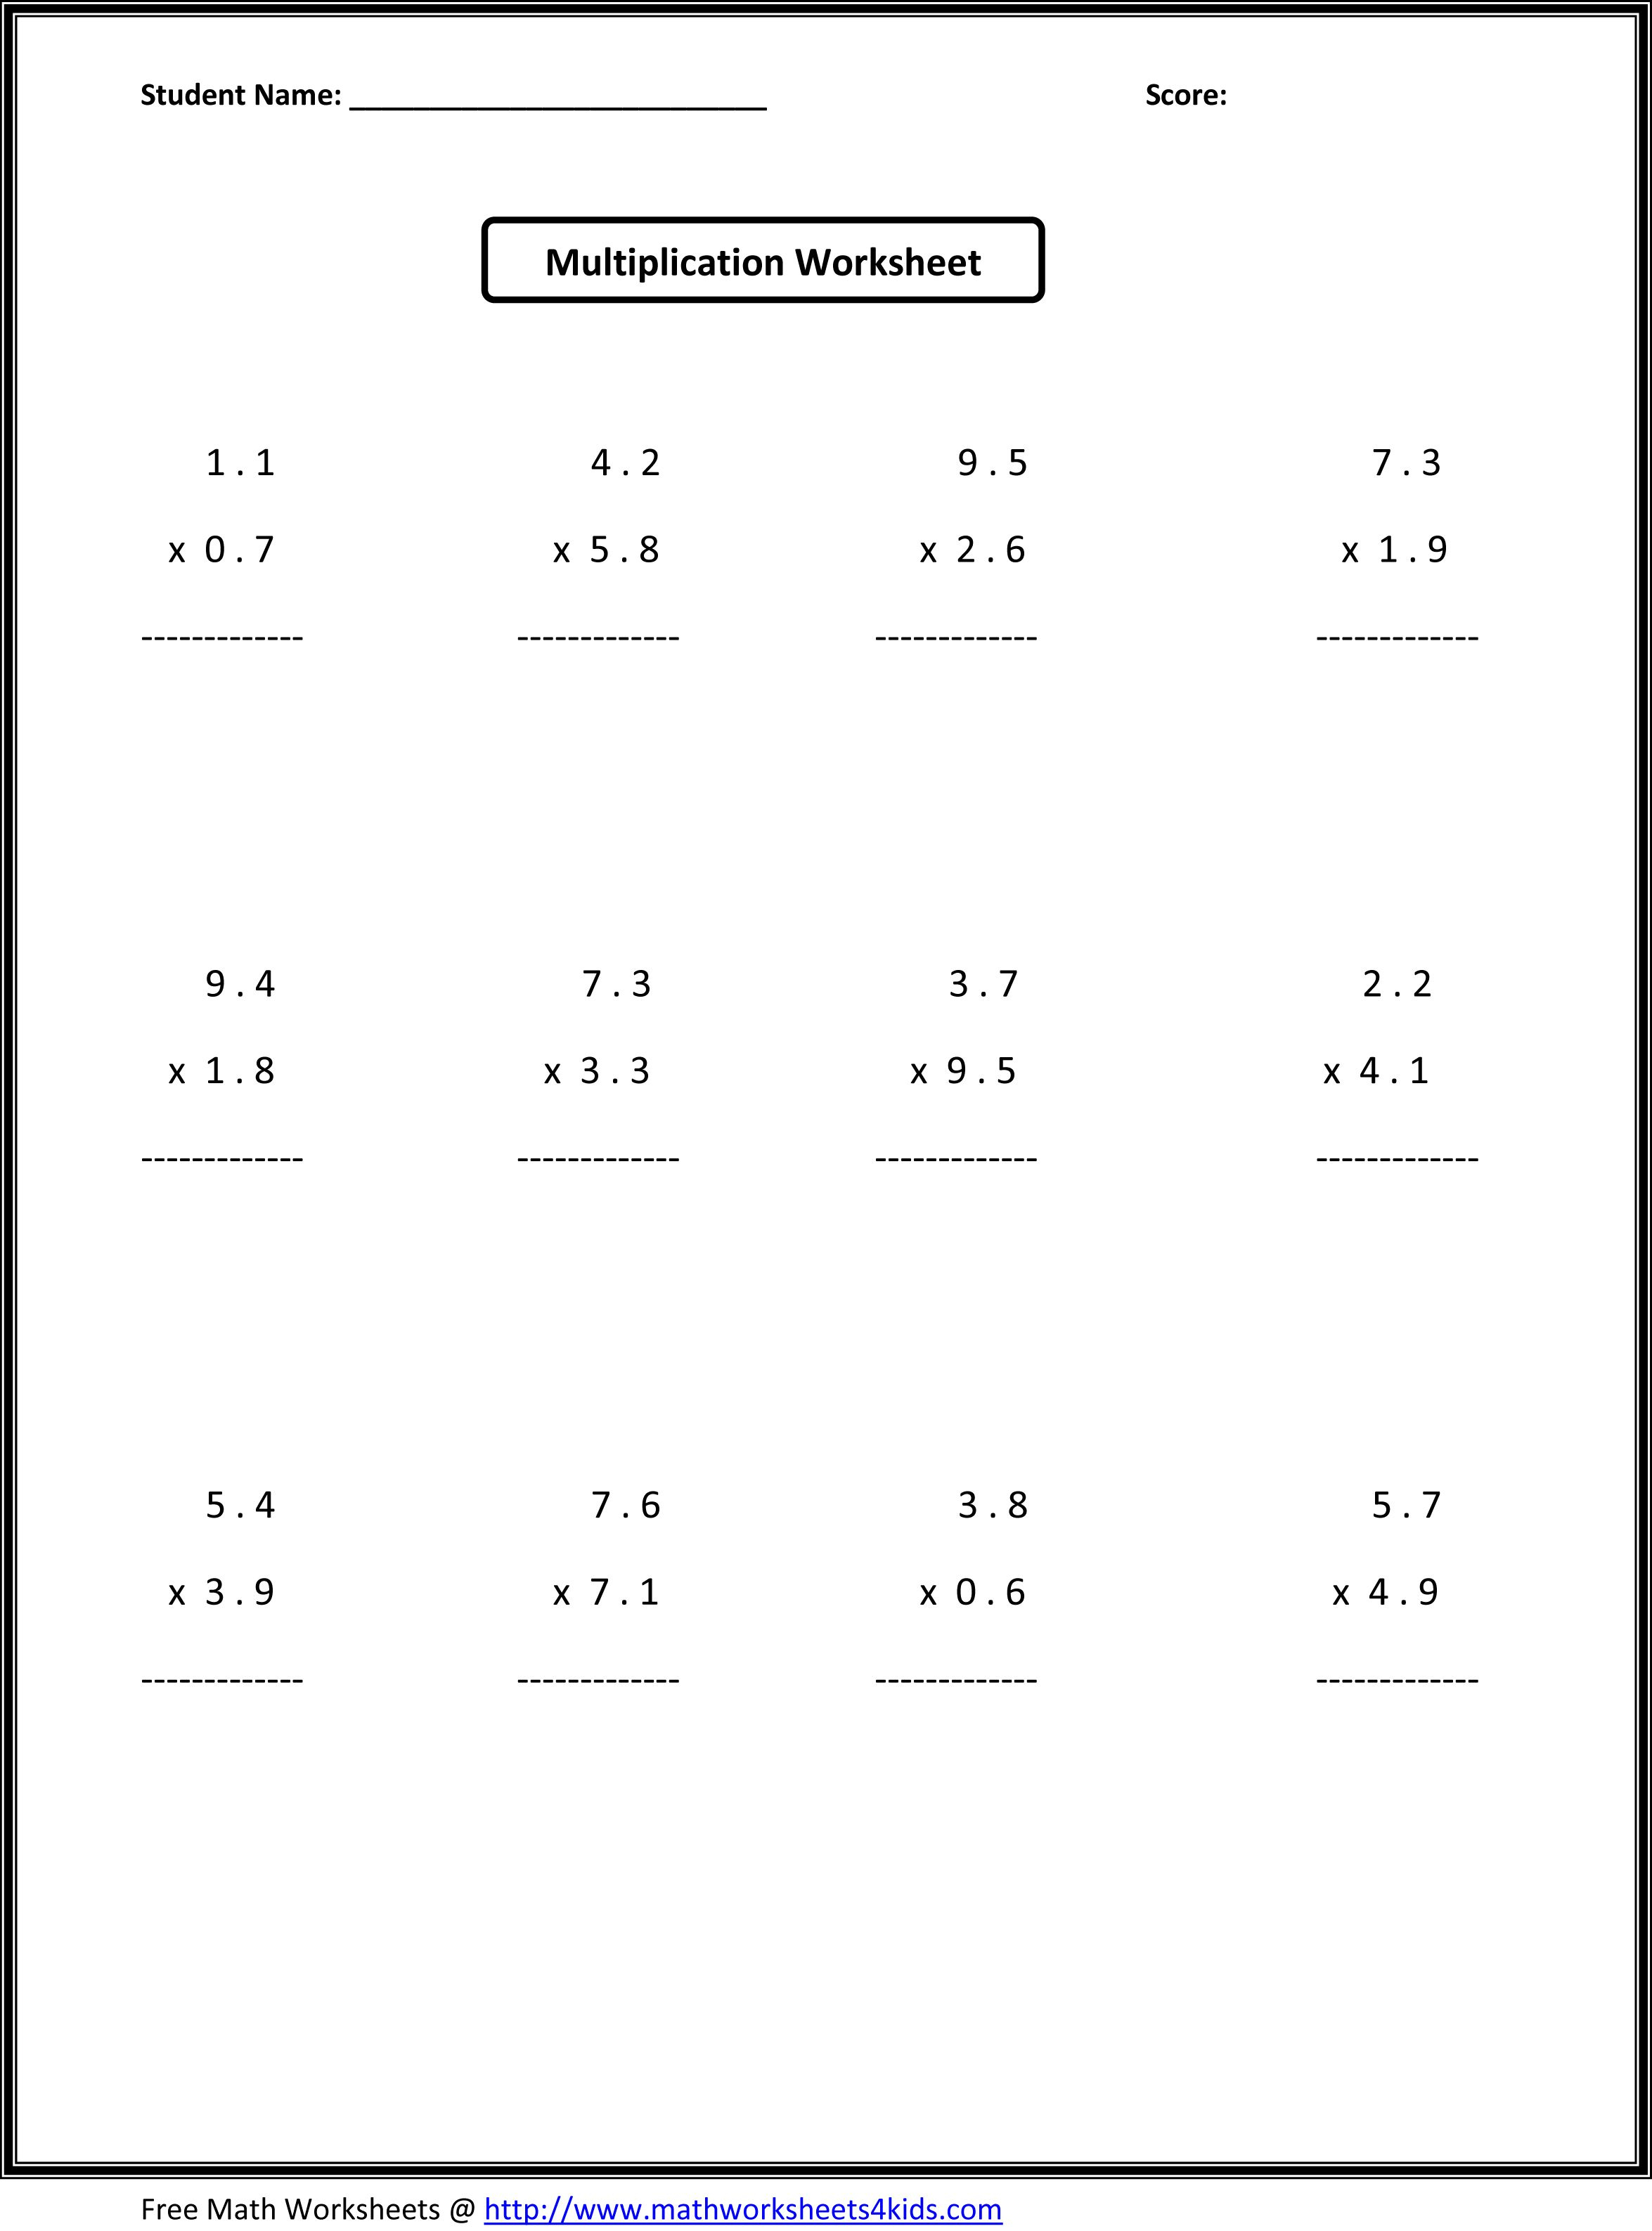 7Th Grade Math Worksheets | Value Worksheets Absolute Value - Free | Free Printable Multiplication Worksheets For 6Th Grade